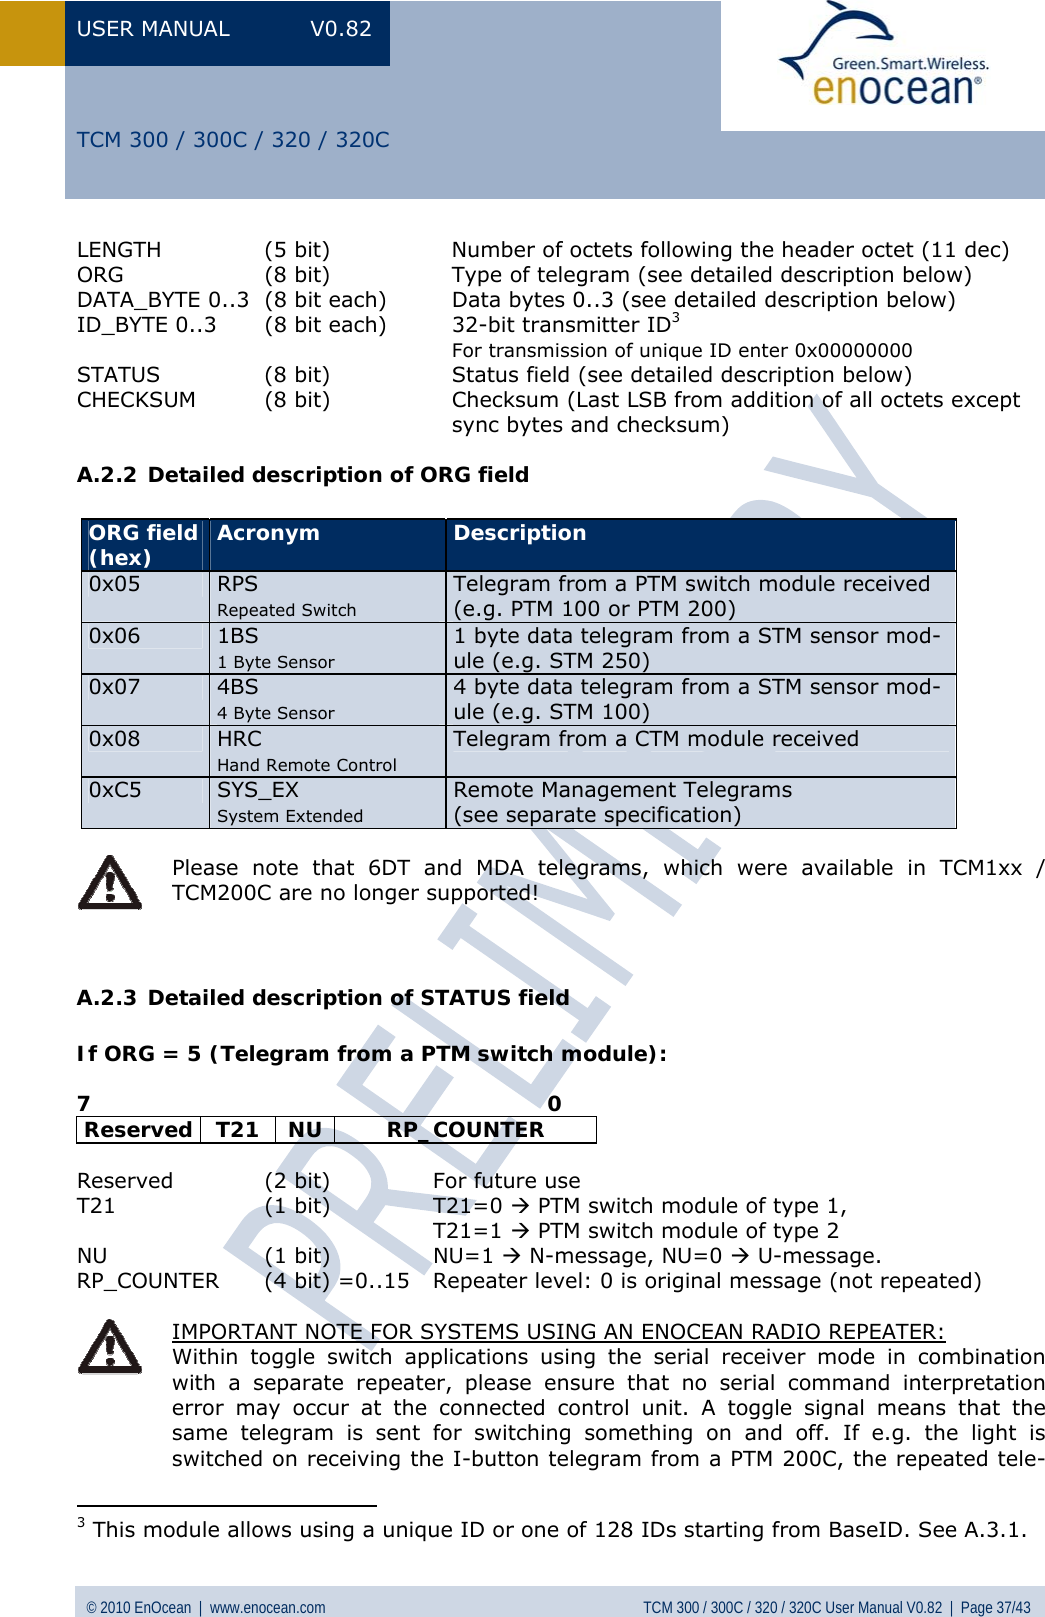 USER MANUAL V0.82 © 2010 EnOcean  |  www.enocean.com  TCM 300 / 300C / 320 / 320C User Manual V0.82  |  Page 37/43   TCM 300 / 300C / 320 / 320C LENGTH  (5 bit)  Number of octets following the header octet (11 dec) ORG  (8 bit)  Type of telegram (see detailed description below) DATA_BYTE 0..3  (8 bit each)   Data bytes 0..3 (see detailed description below) ID_BYTE 0..3  (8 bit each)   32-bit transmitter ID3   For transmission of unique ID enter 0x00000000 STATUS (8 bit)  Status field (see detailed description below) CHECKSUM  (8 bit)  Checksum (Last LSB from addition of all octets except    sync bytes and checksum) A.2.2 Detailed description of ORG field  ORG field  (hex)  Acronym  Description 0x05  RPS Repeated Switch Telegram from a PTM switch module received  (e.g. PTM 100 or PTM 200) 0x06  1BS 1 Byte Sensor 1 byte data telegram from a STM sensor mod-ule (e.g. STM 250) 0x07  4BS 4 Byte Sensor 4 byte data telegram from a STM sensor mod-ule (e.g. STM 100) 0x08  HRC Hand Remote Control Telegram from a CTM module received 0xC5  SYS_EX System Extended Remote Management Telegrams  (see separate specification)   Please note that 6DT and MDA telegrams, which were available in TCM1xx / TCM200C are no longer supported!   A.2.3 Detailed description of STATUS field  If ORG = 5 (Telegram from a PTM switch module):  7                                                                0 Reserved T21  NU  RP_COUNTER  Reserved  (2 bit)   For future use T21 (1 bit) T21=0 Æ PTM switch module of type 1,    T21=1 Æ PTM switch module of type 2 NU (1 bit) NU=1 Æ N-message, NU=0 Æ U-message. RP_COUNTER  (4 bit) =0..15  Repeater level: 0 is original message (not repeated)   IMPORTANT NOTE FOR SYSTEMS USING AN ENOCEAN RADIO REPEATER:  Within toggle switch applications using the serial receiver mode in combination with a separate repeater, please ensure that no serial command interpretation error may occur at the connected control unit. A toggle signal means that the same telegram is sent for switching something on and off. If e.g. the light is switched on receiving the I-button telegram from a PTM 200C, the repeated tele-                                          3 This module allows using a unique ID or one of 128 IDs starting from BaseID. See  A.3.1. 